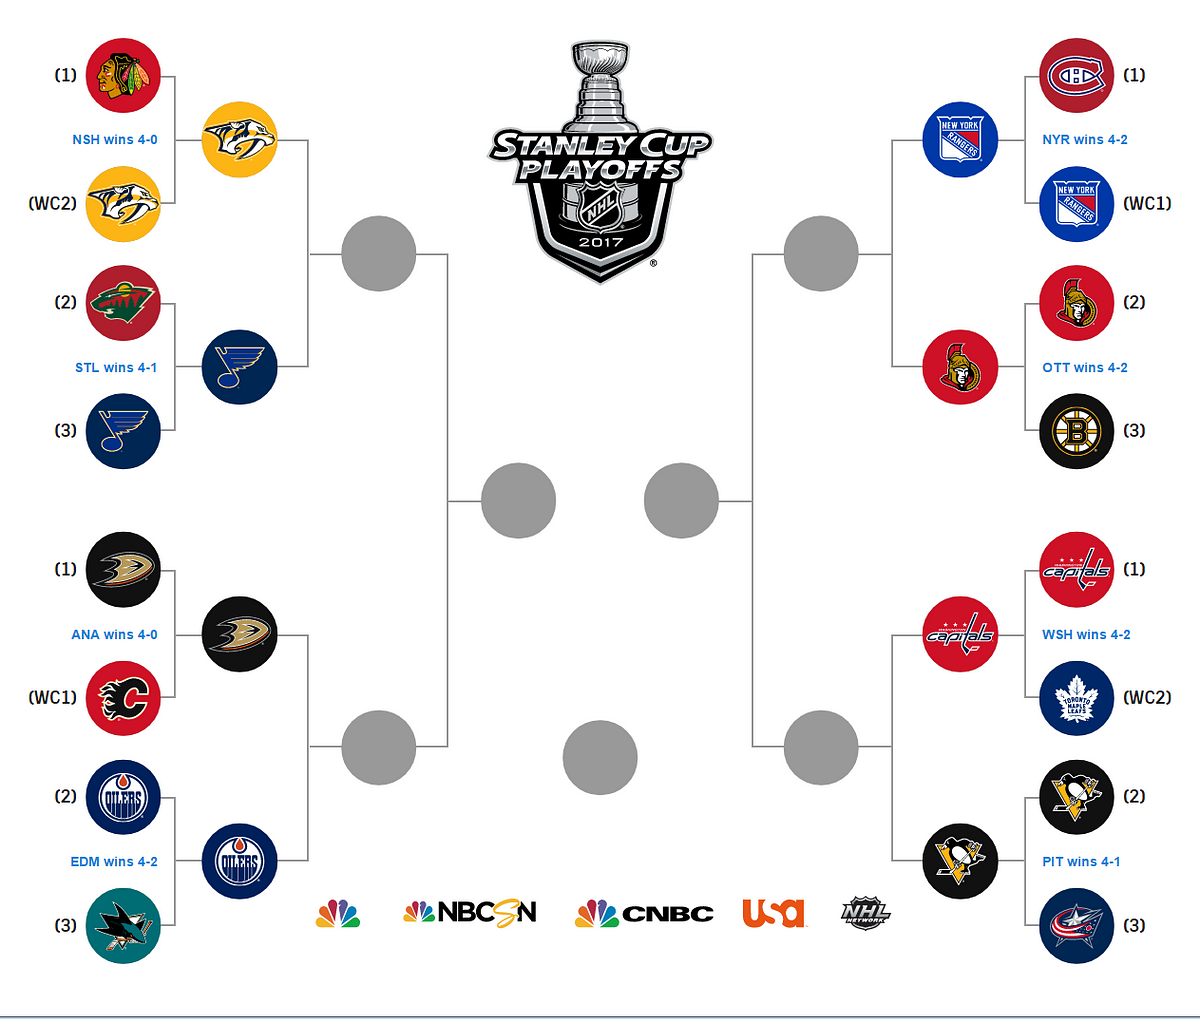 Summing Up The First Round Picking The Second Round Of The Stanley Cup